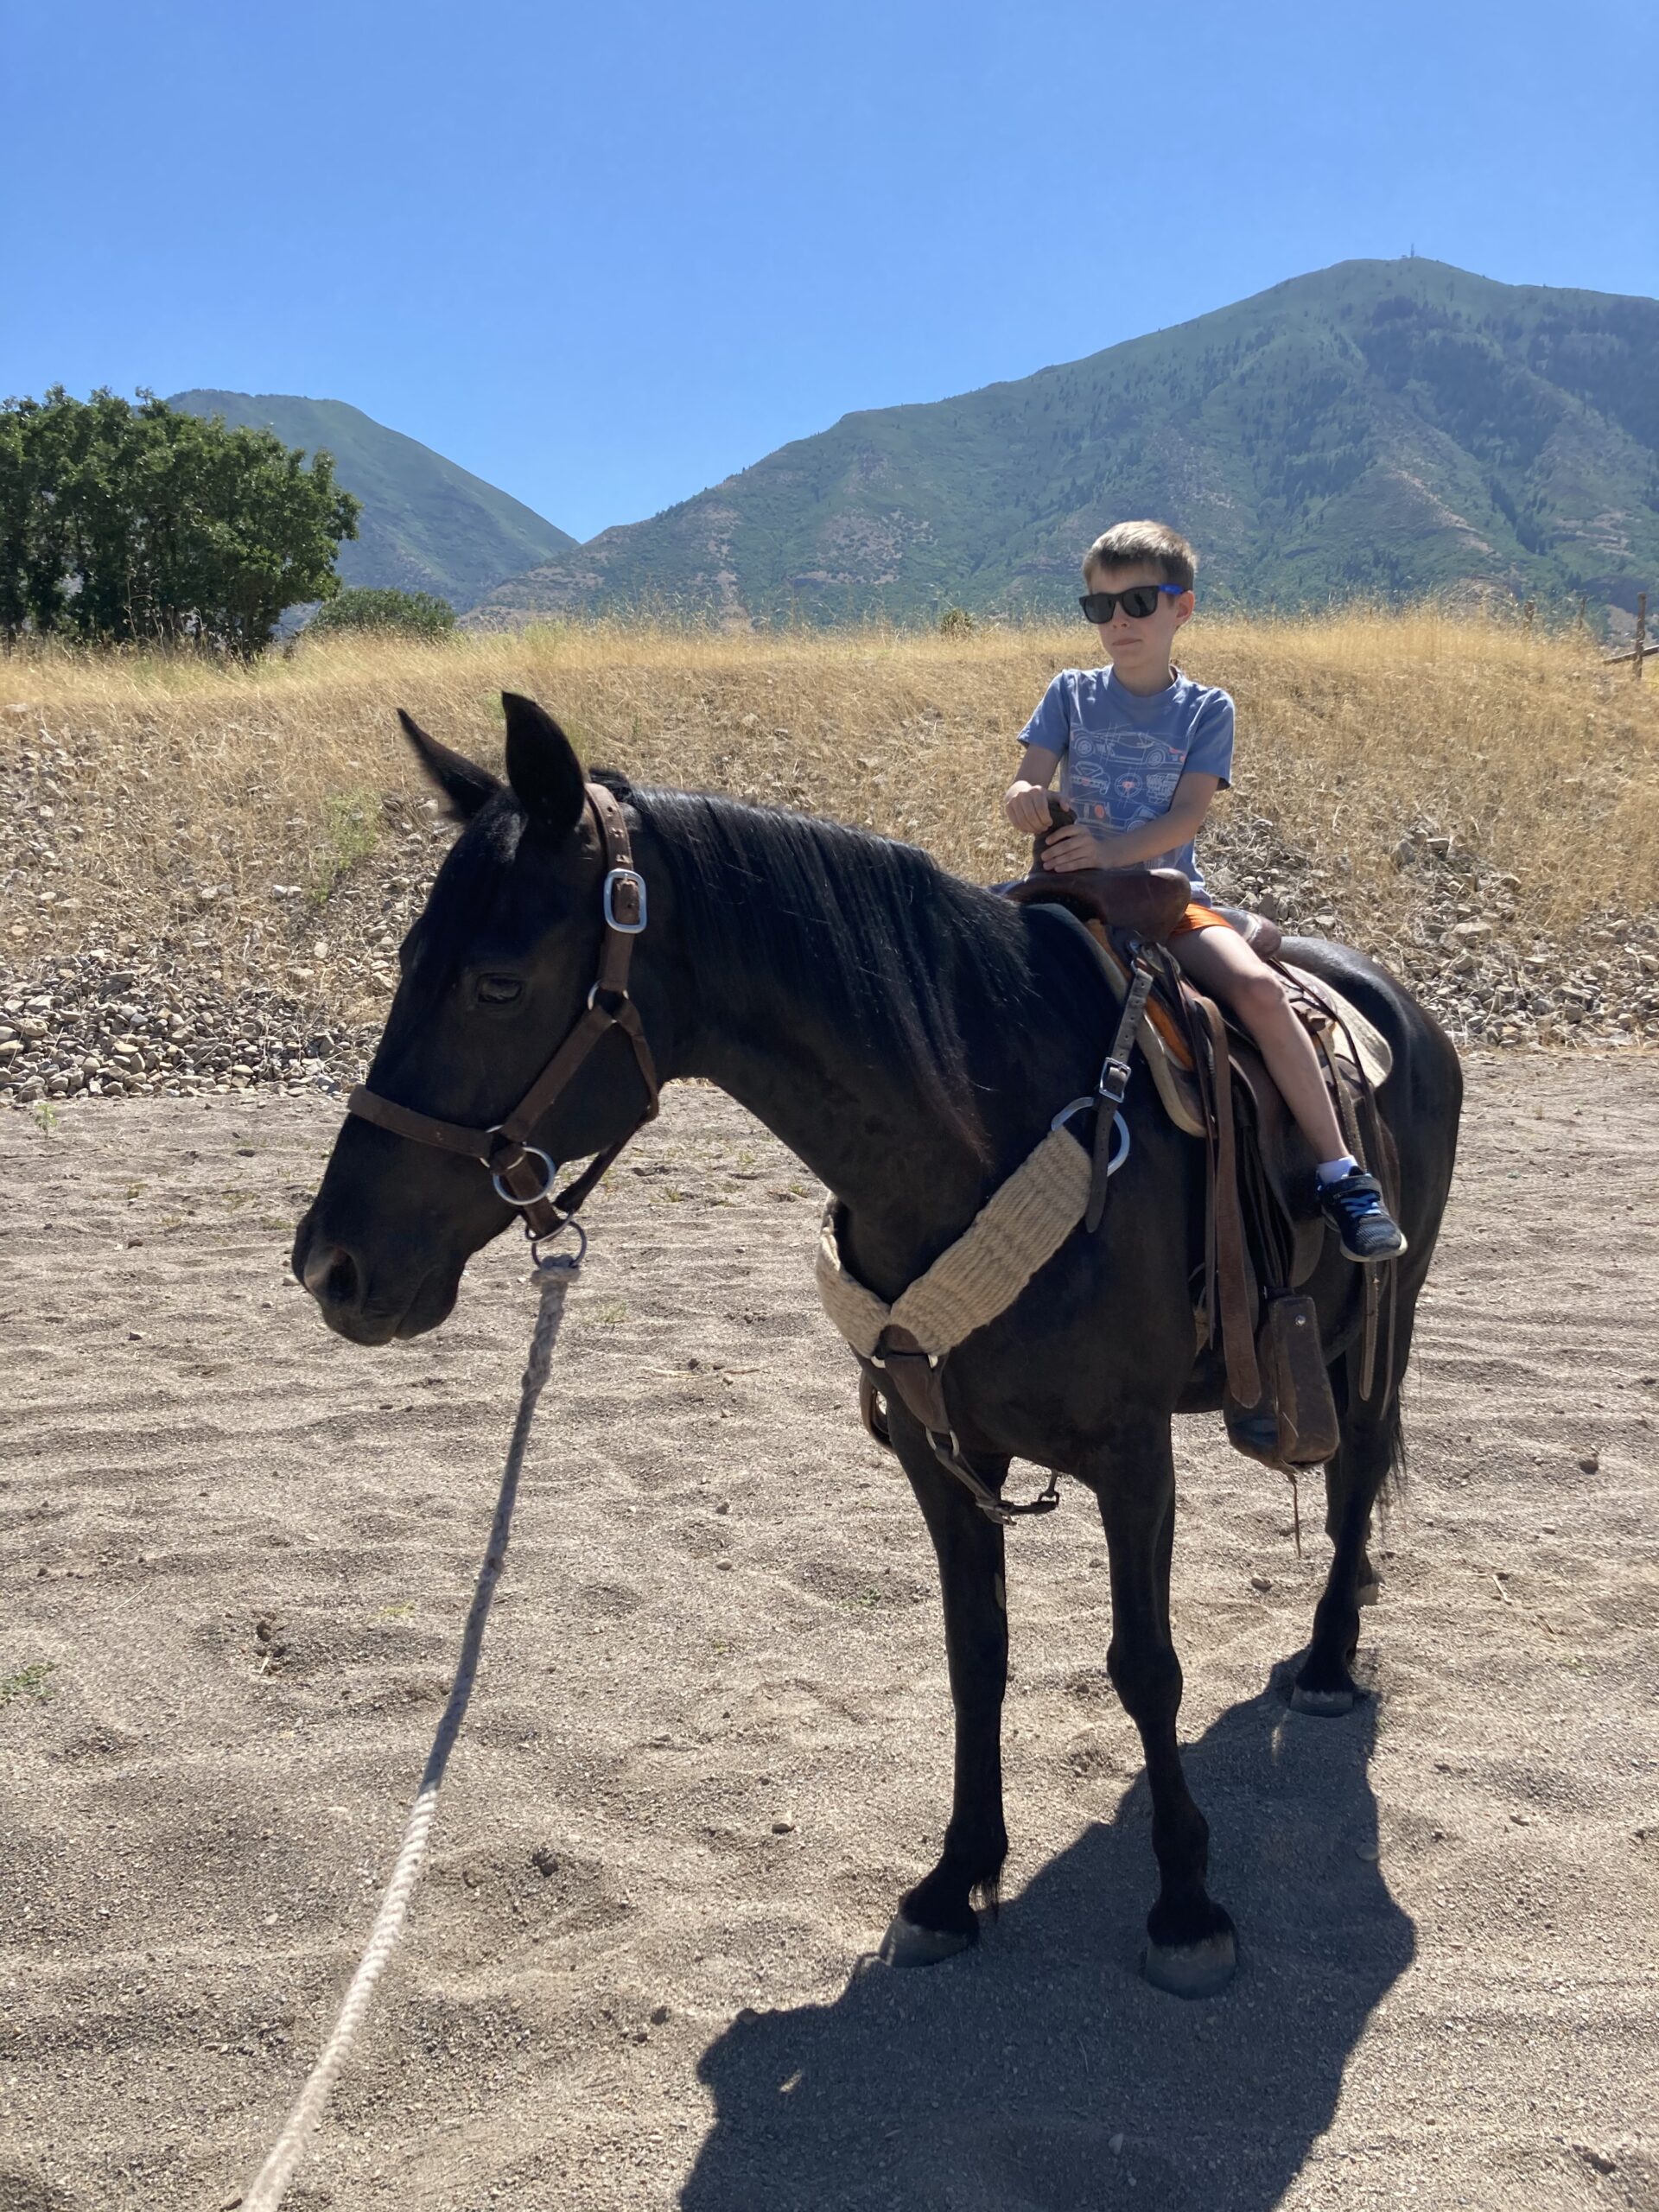 Rocky Mountain Horse for Sale - Gucci- Grulla - Gaited Horse